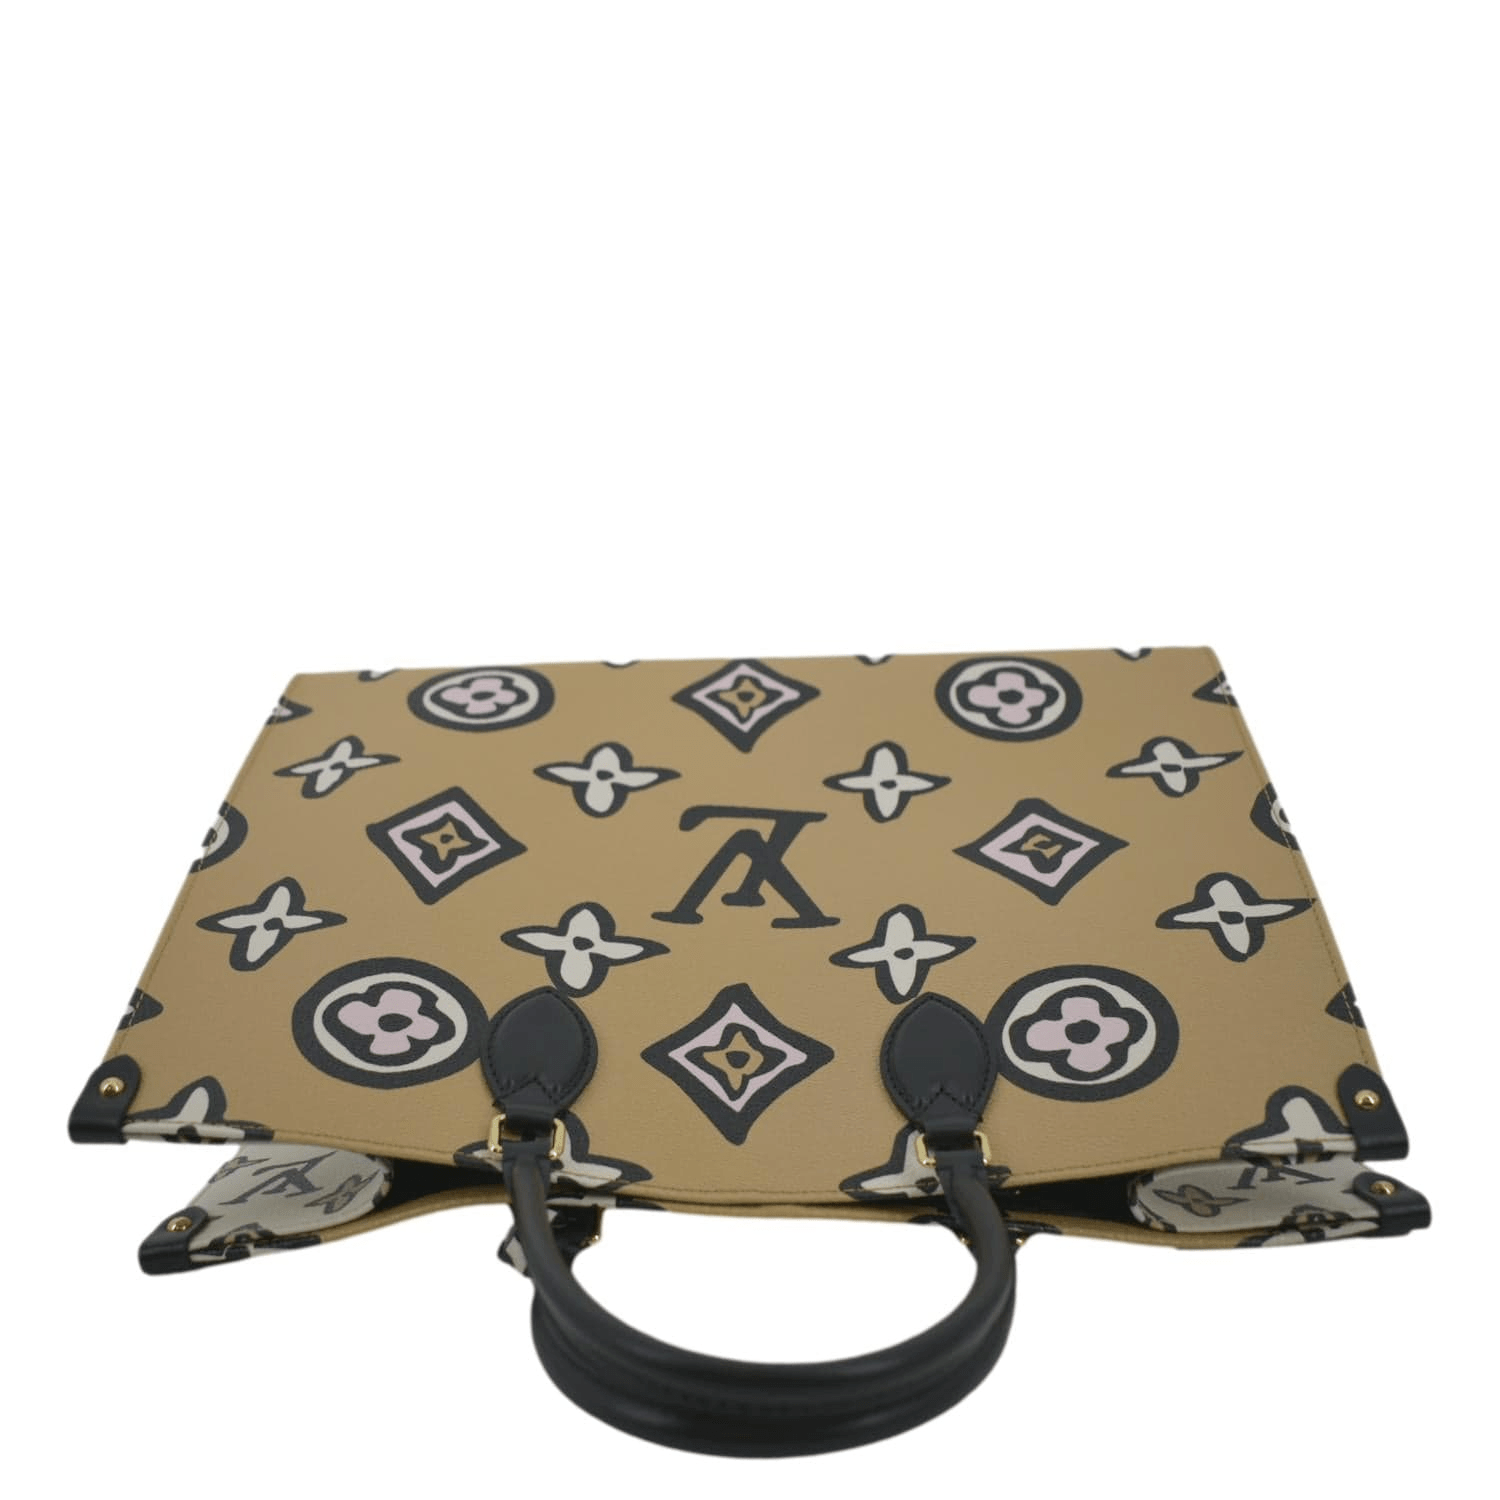 Download The iconic Louis Vuitton Monogram in its classic cream